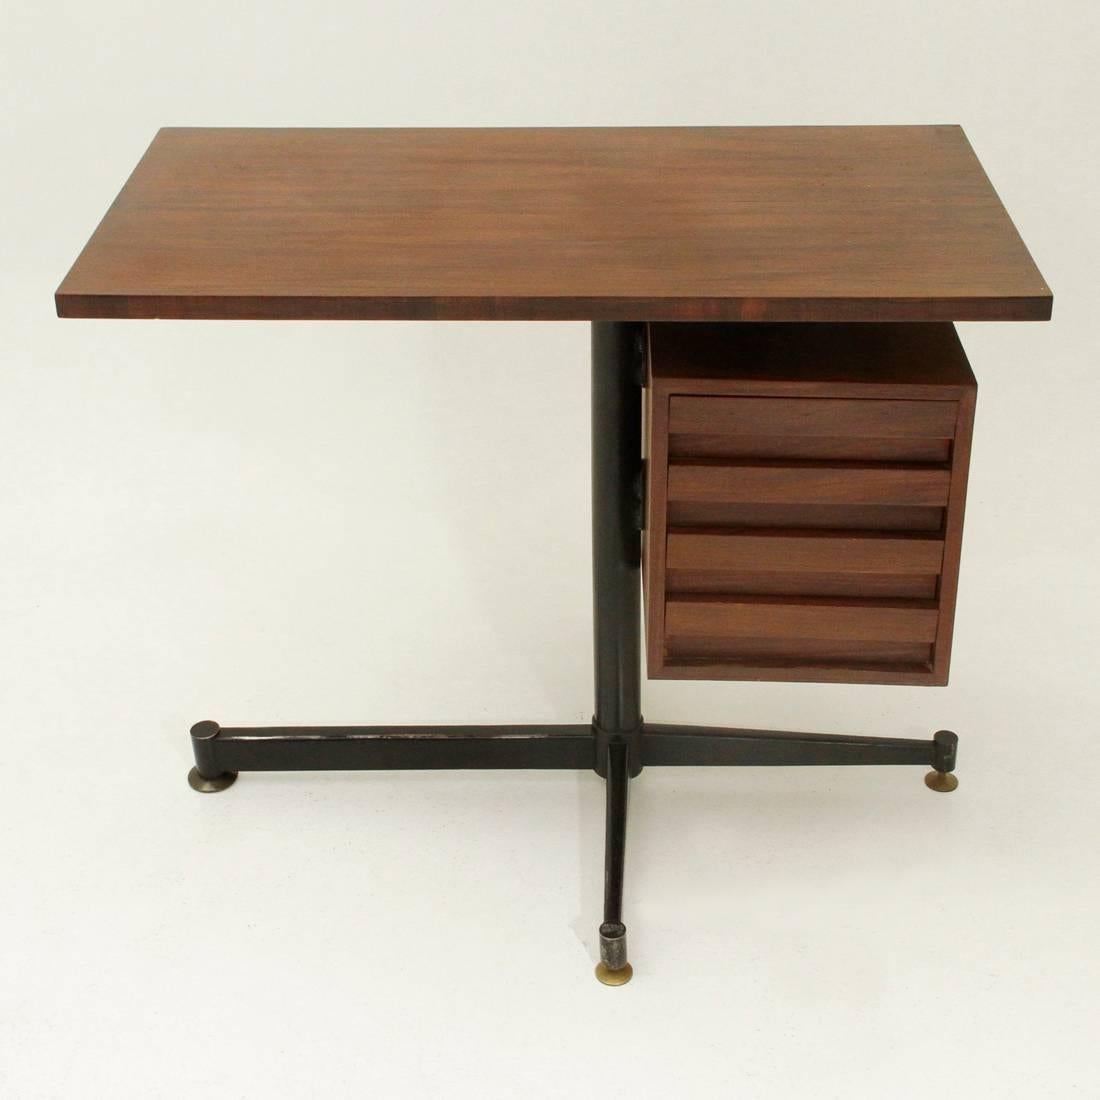 Small Italian desk production of the 50s.
Black painted metal structure, adjustable brass feet.
Top and chest of drawers in teak veneered wood.
Good general conditions, some signs due to normal use over time

Dimensions: Width 90 cm - Depth 50 cm -